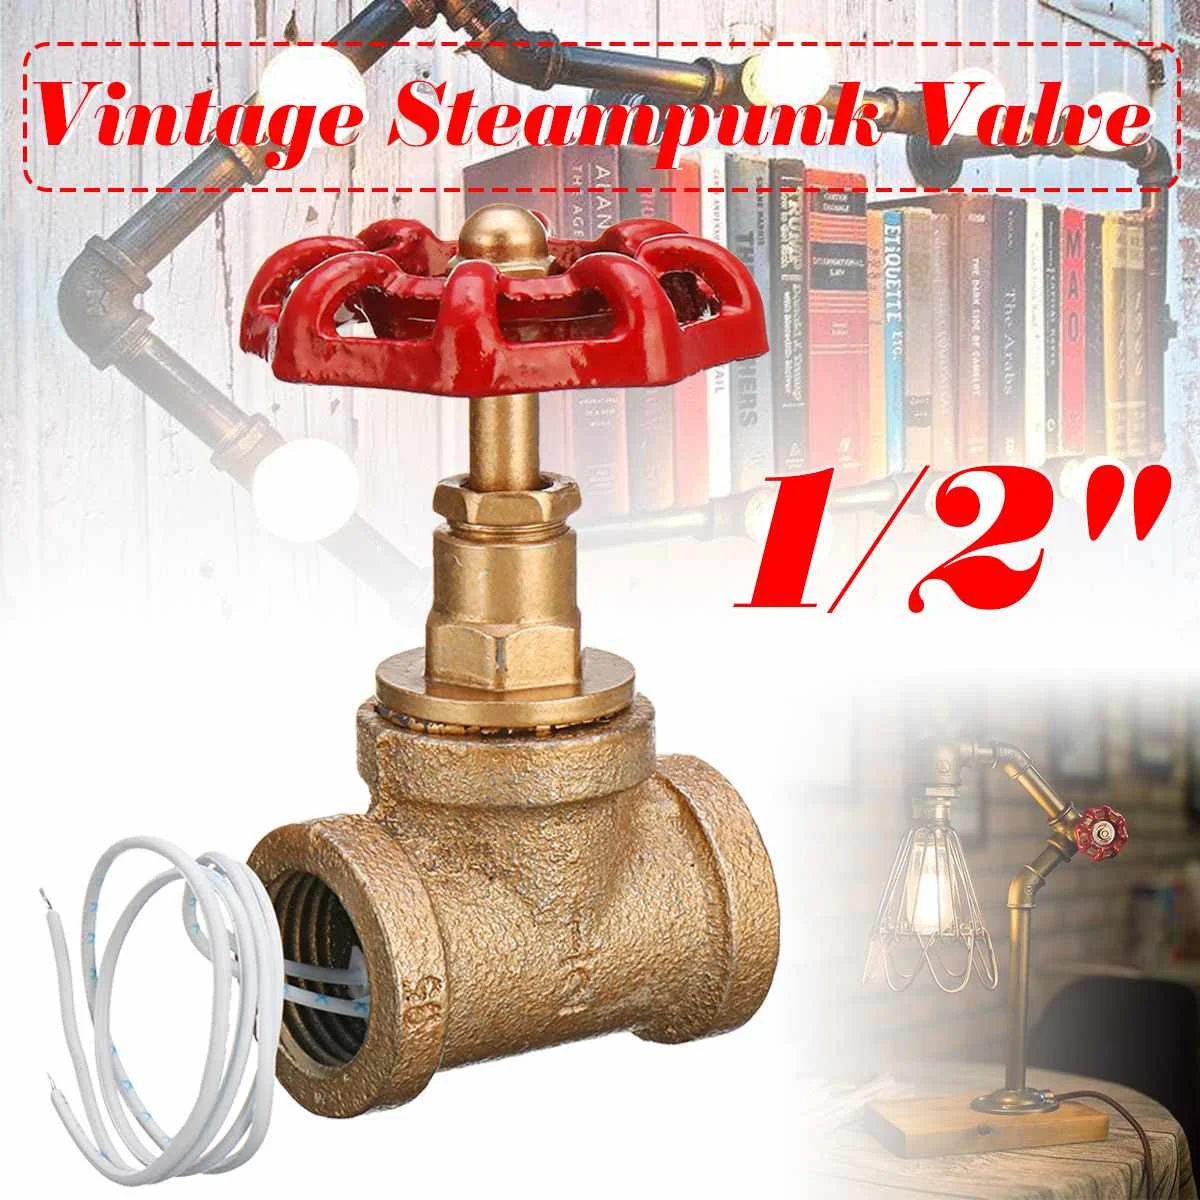 

NEW Vintage 1/2" Stop Valve Light Switch With Wire For Lamp Loft Style Iron Valve Vintage Table Lamp Water Pipe Fixtures Lighti